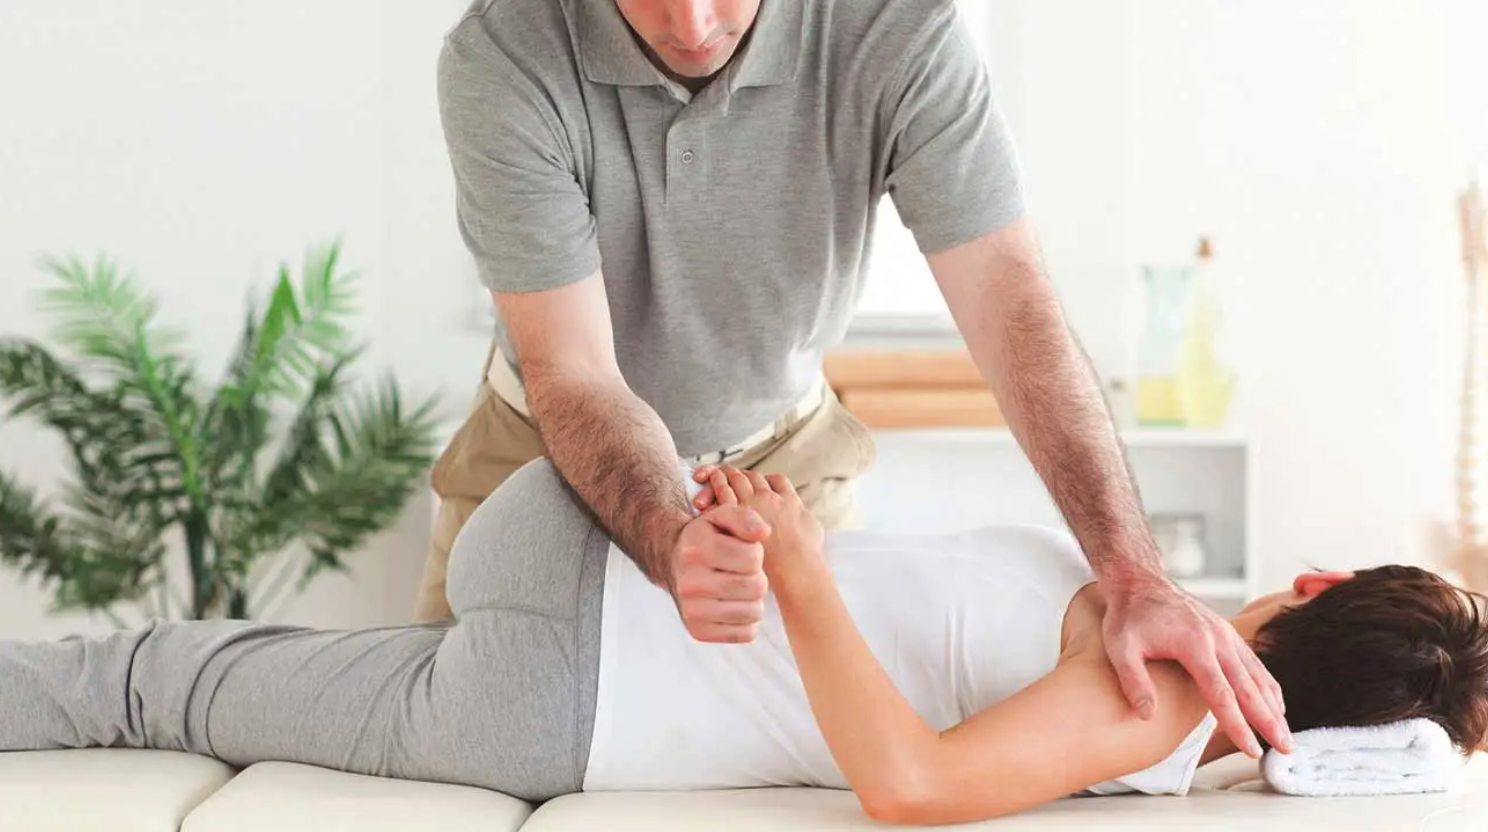 Chiropractic Care Adjustments For Low Back Pain